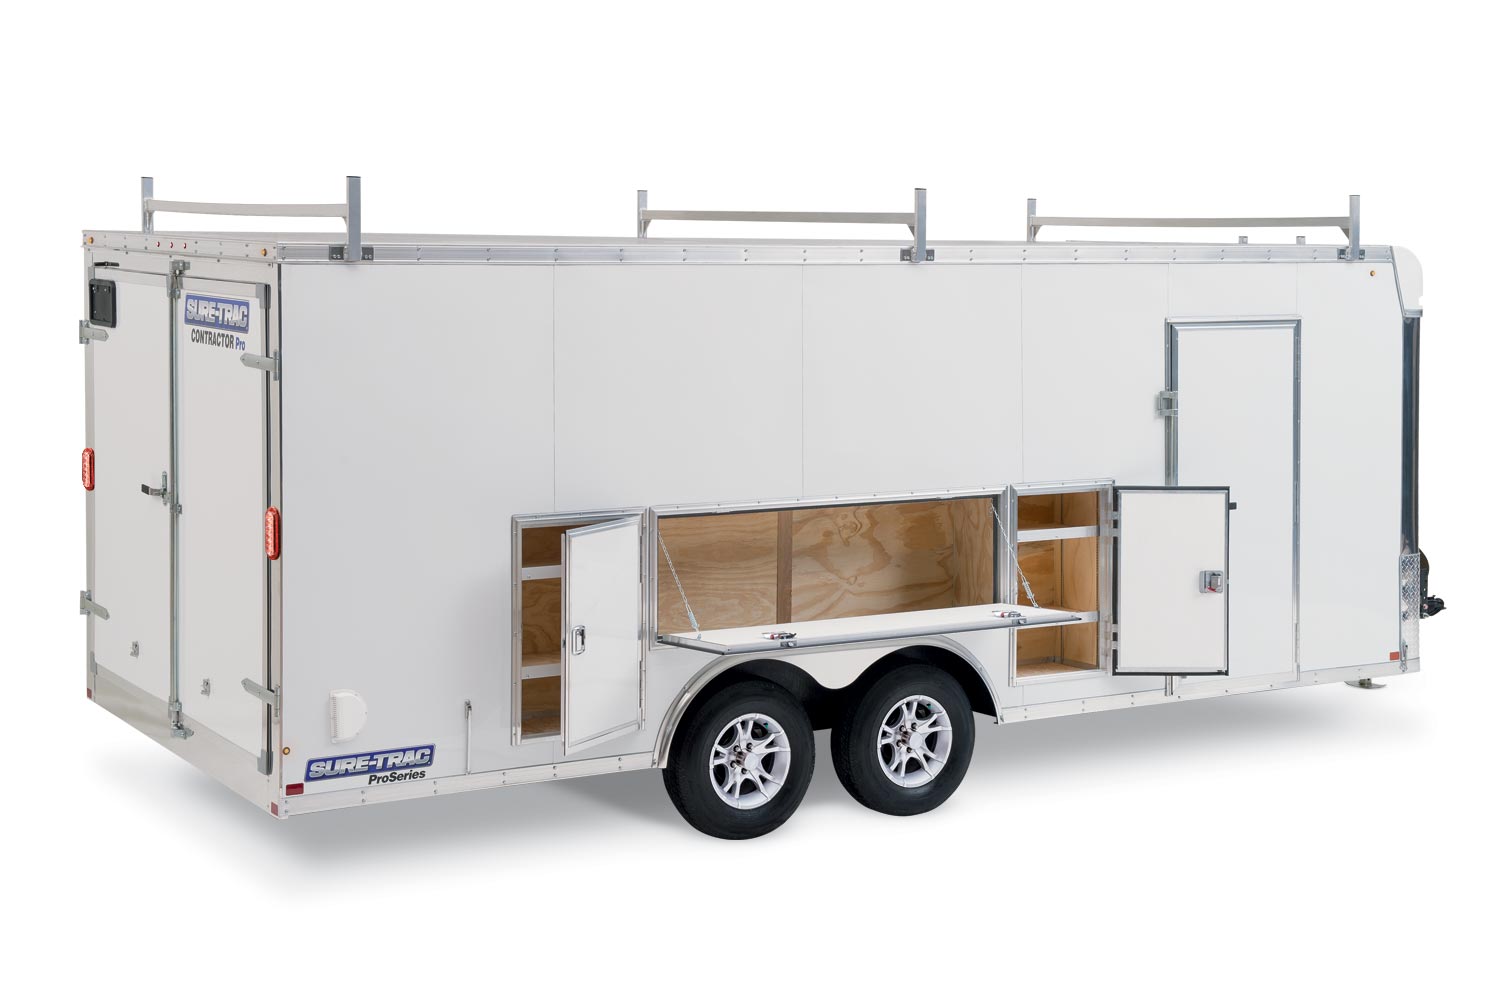 Contractor Pro Bullnose Cargo passenger side view with doors and cabinets open.